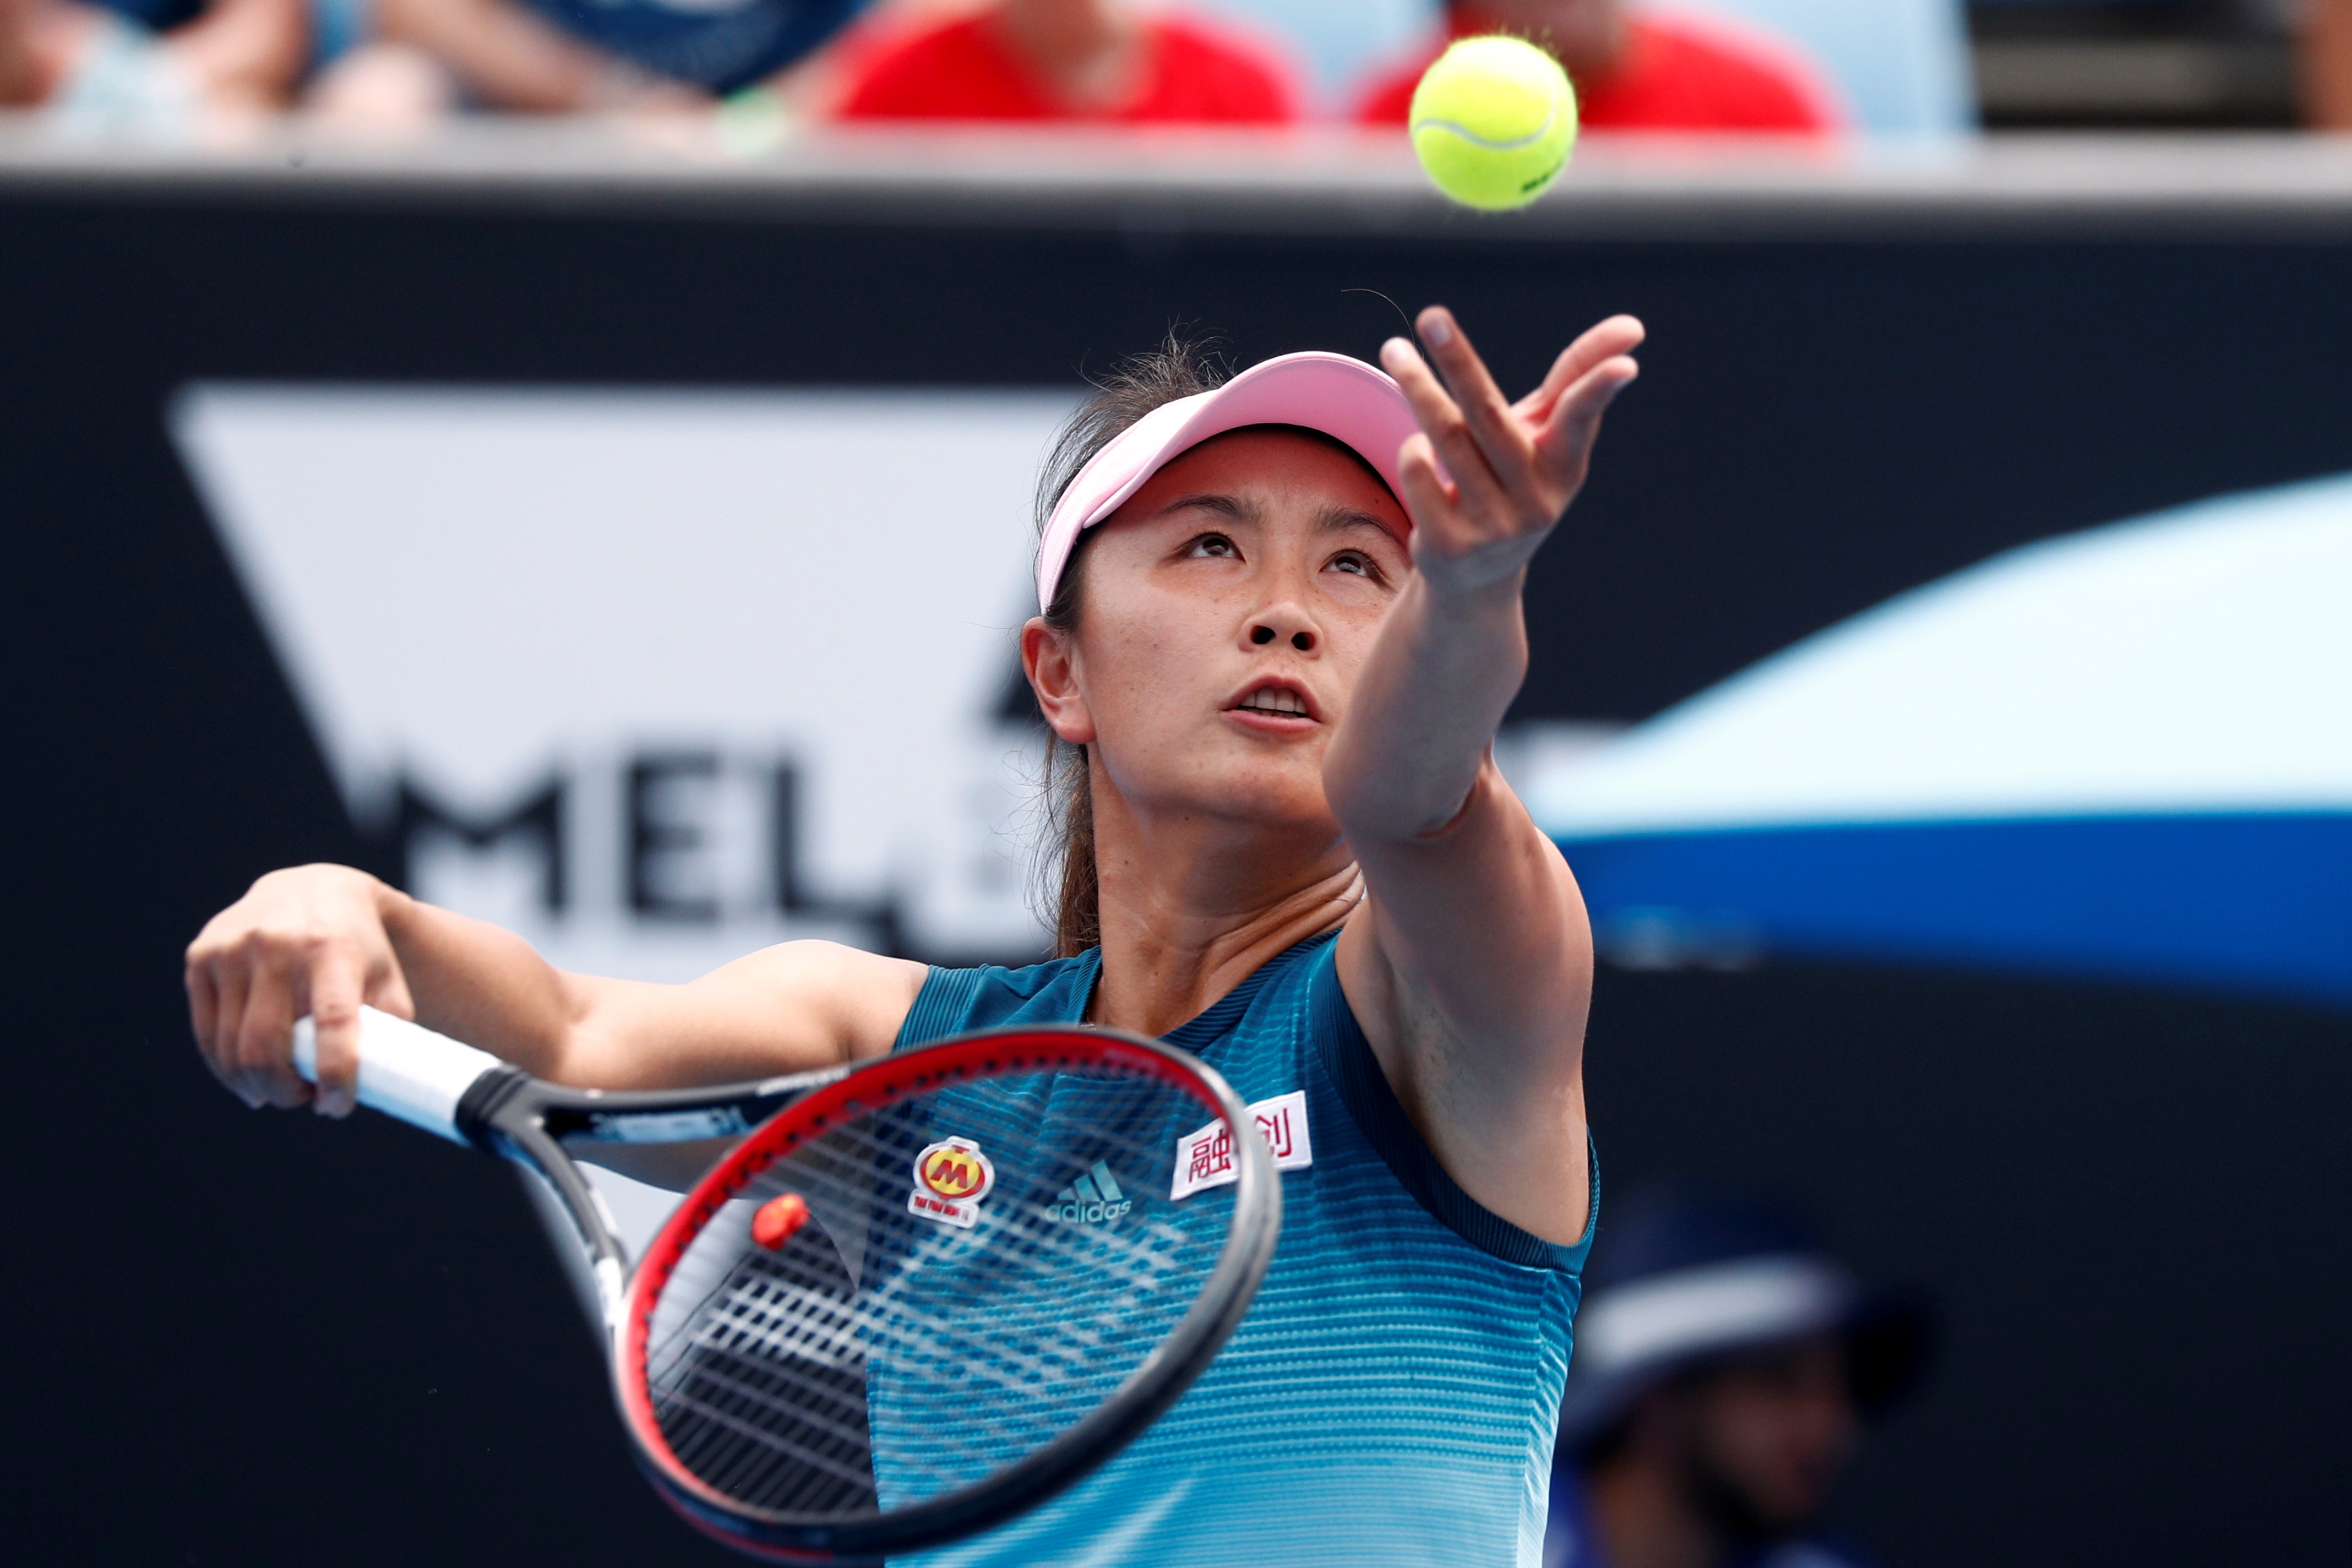 A file photo of China’s Peng Shuai serving during a match at the Australian Open on January 15, 2019. REUTERS/Edgar Su